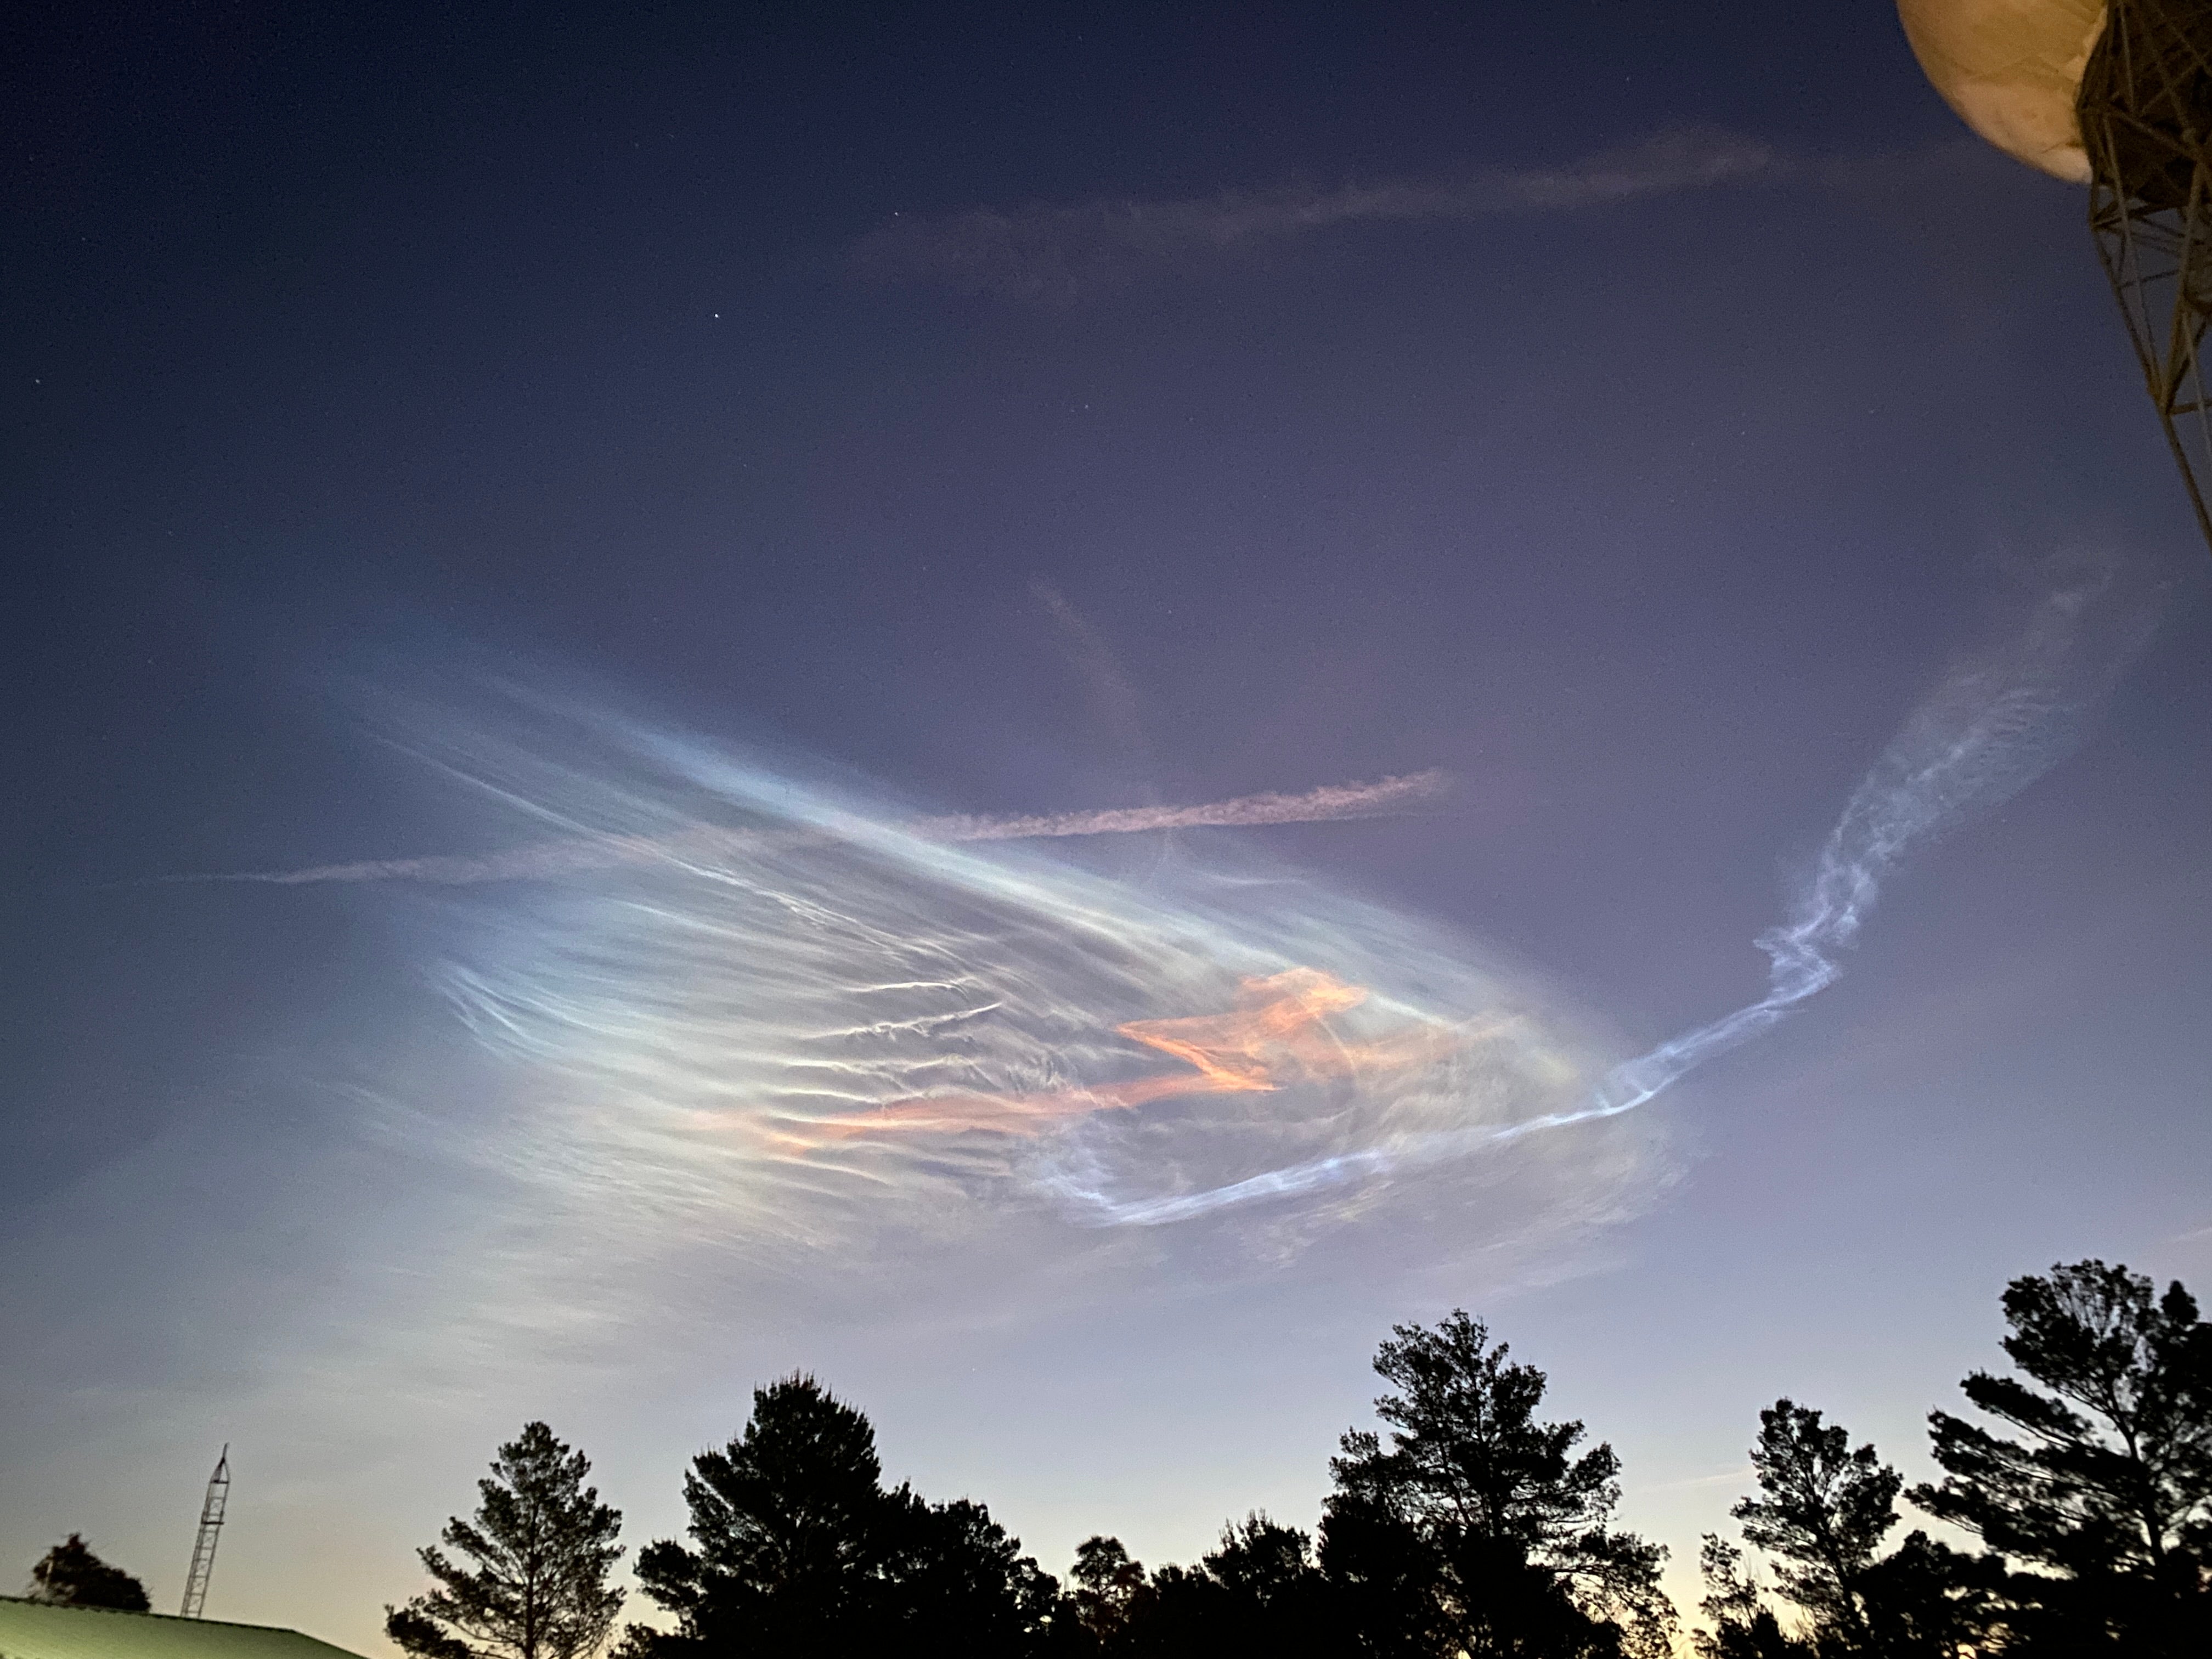 SpaceX launch leaves colorful cloud effect over the sky in Florida